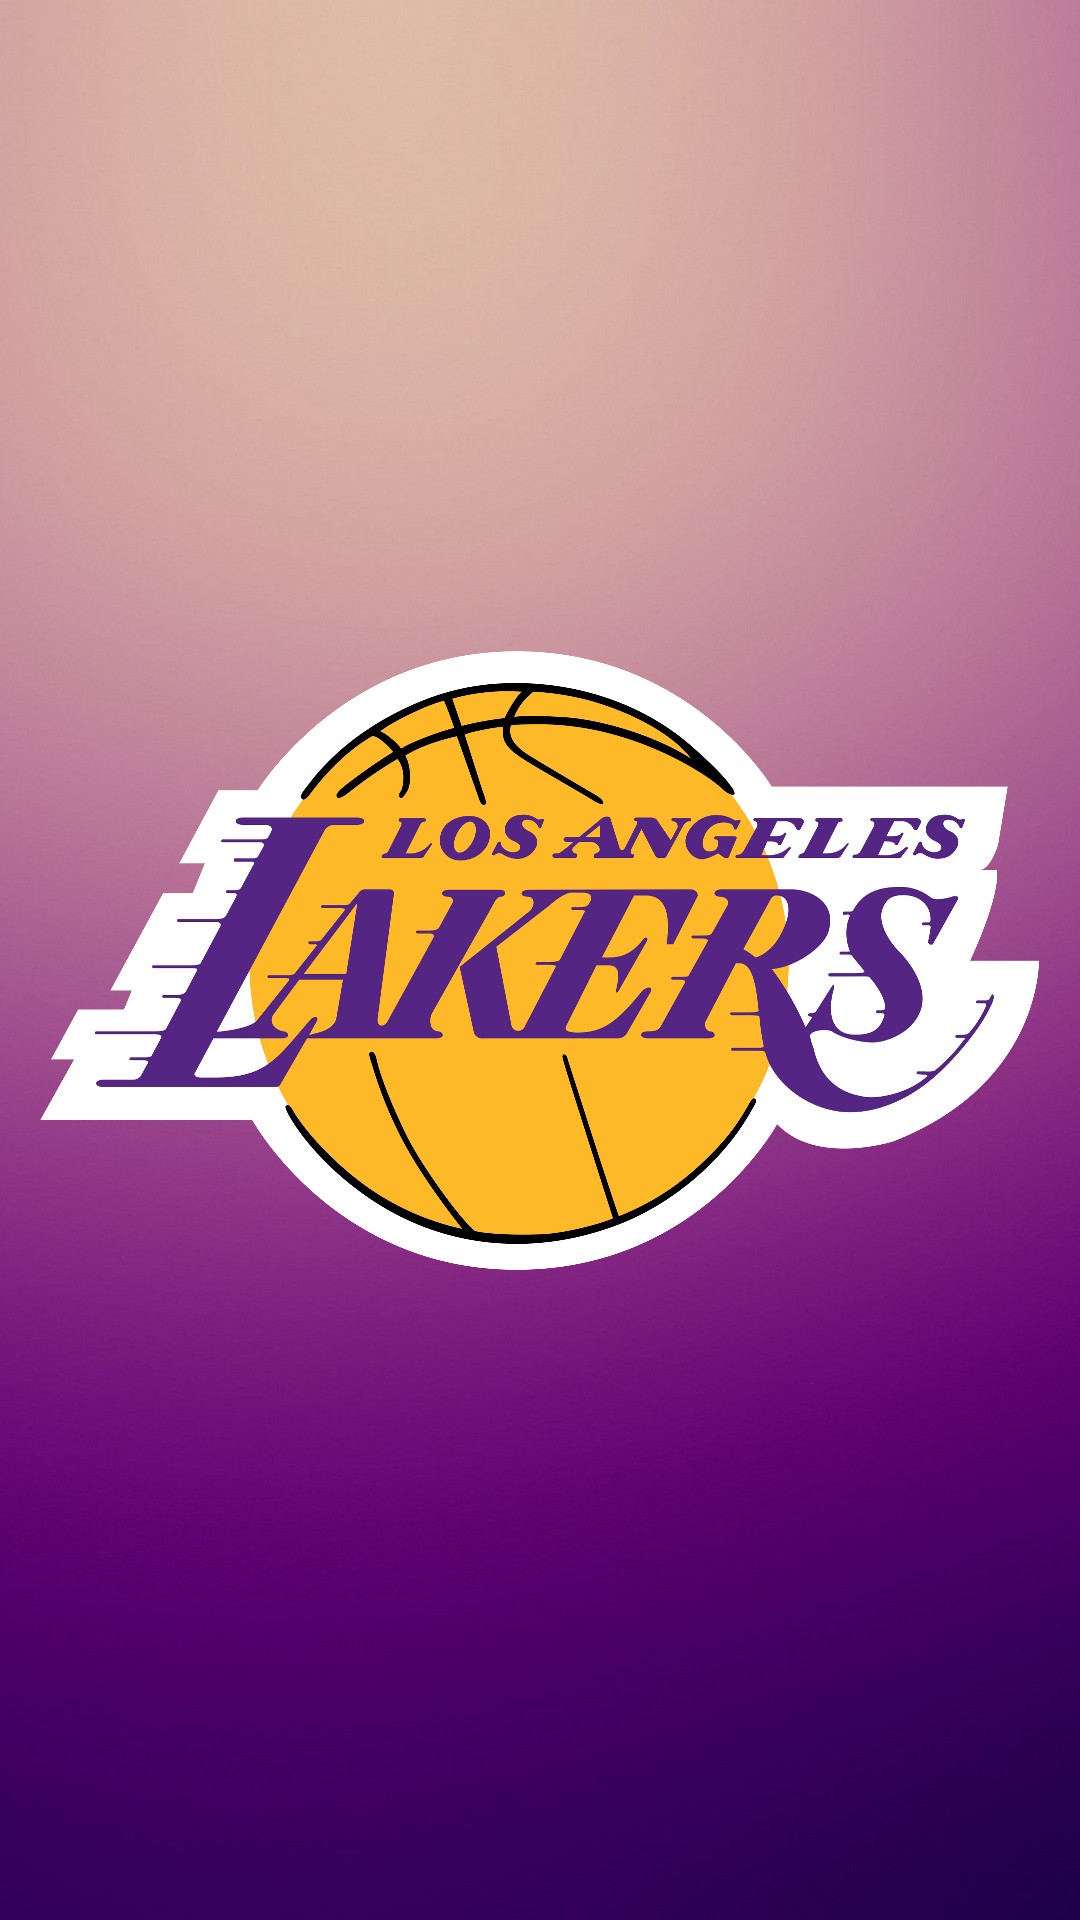 Los Angeles Lakers Iphone Backgrounds With High-resolution - Graphic Design , HD Wallpaper & Backgrounds